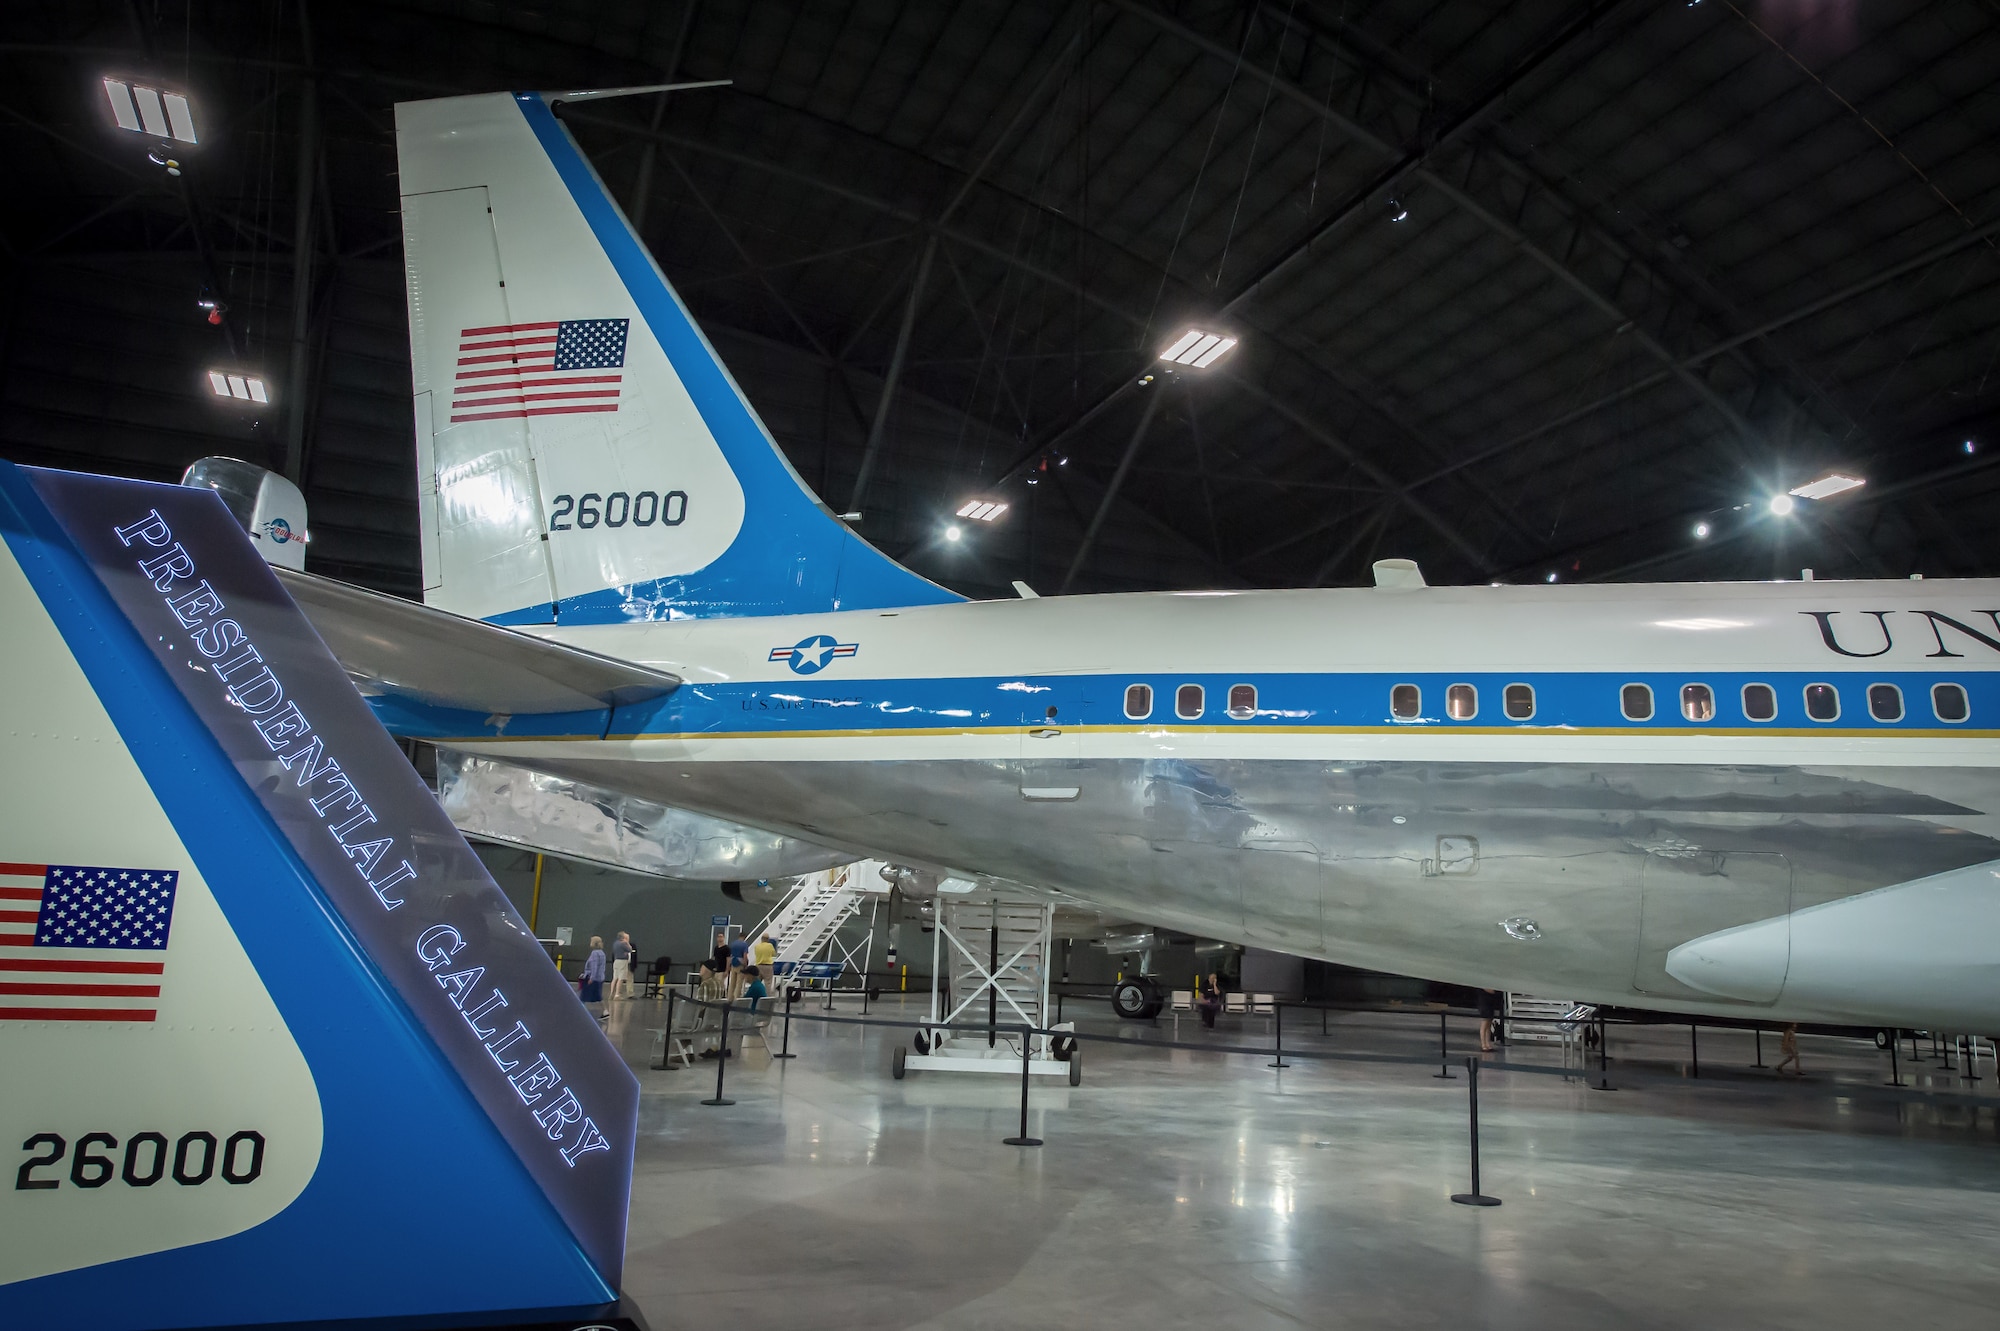 DAYTON, Ohio -- Boeing VC-137C SAM 26000 (Air Force One) in the Presidential Gallery at the National Museum of the United States Air Force. (U.S. Air Force photo by Jim Copes)
